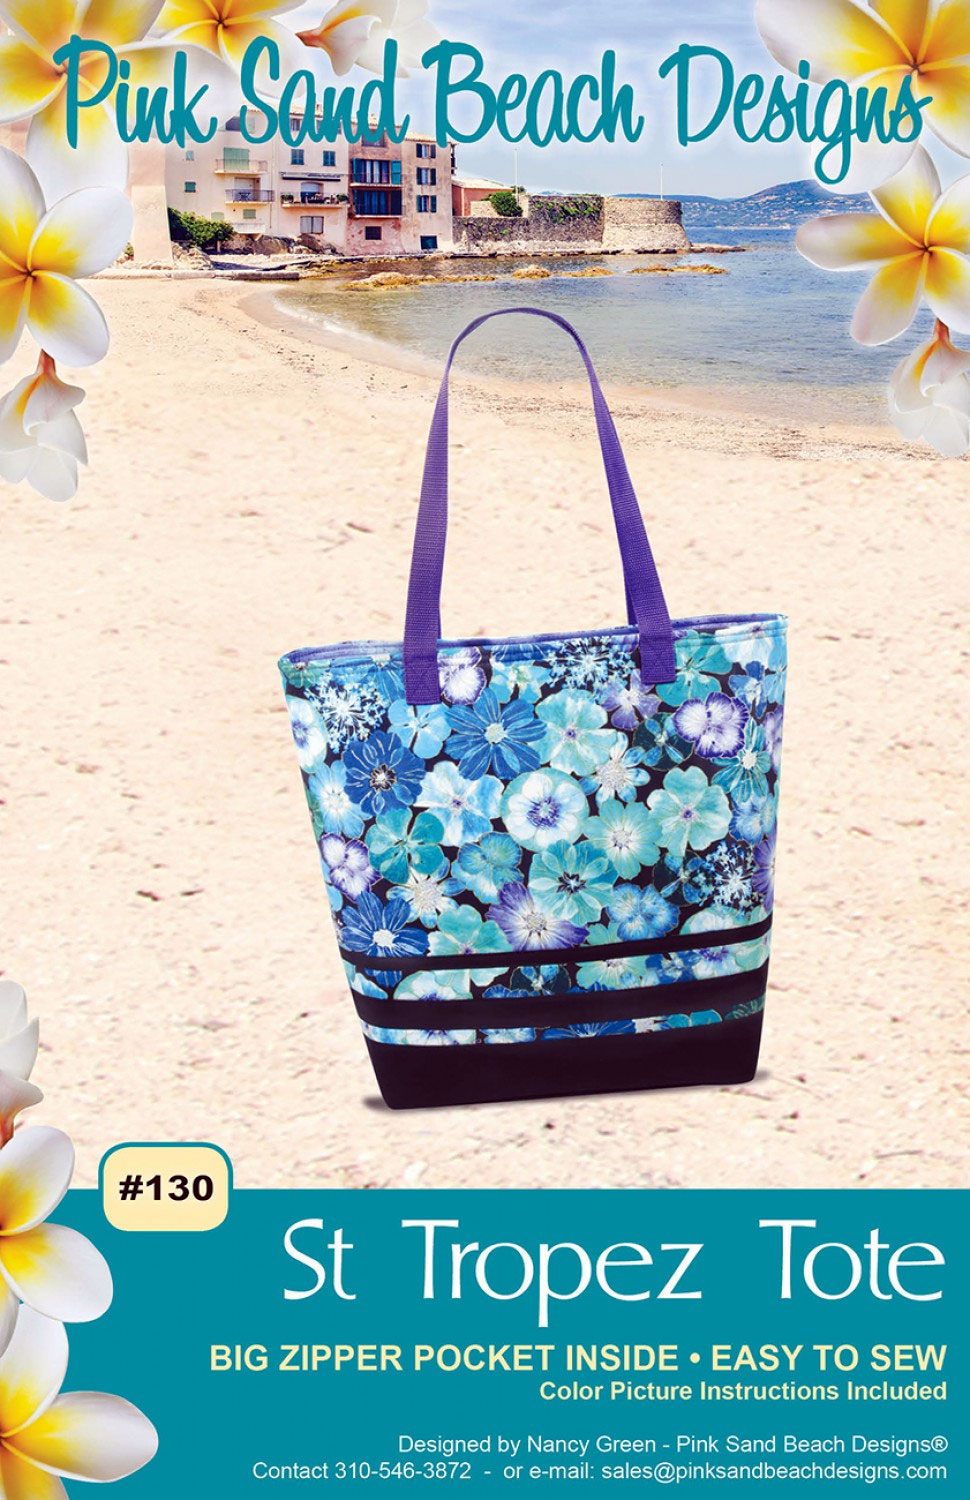 St-Tropez-Tote-sewing-pattern-Pink-Sand-Beach-Designs-front